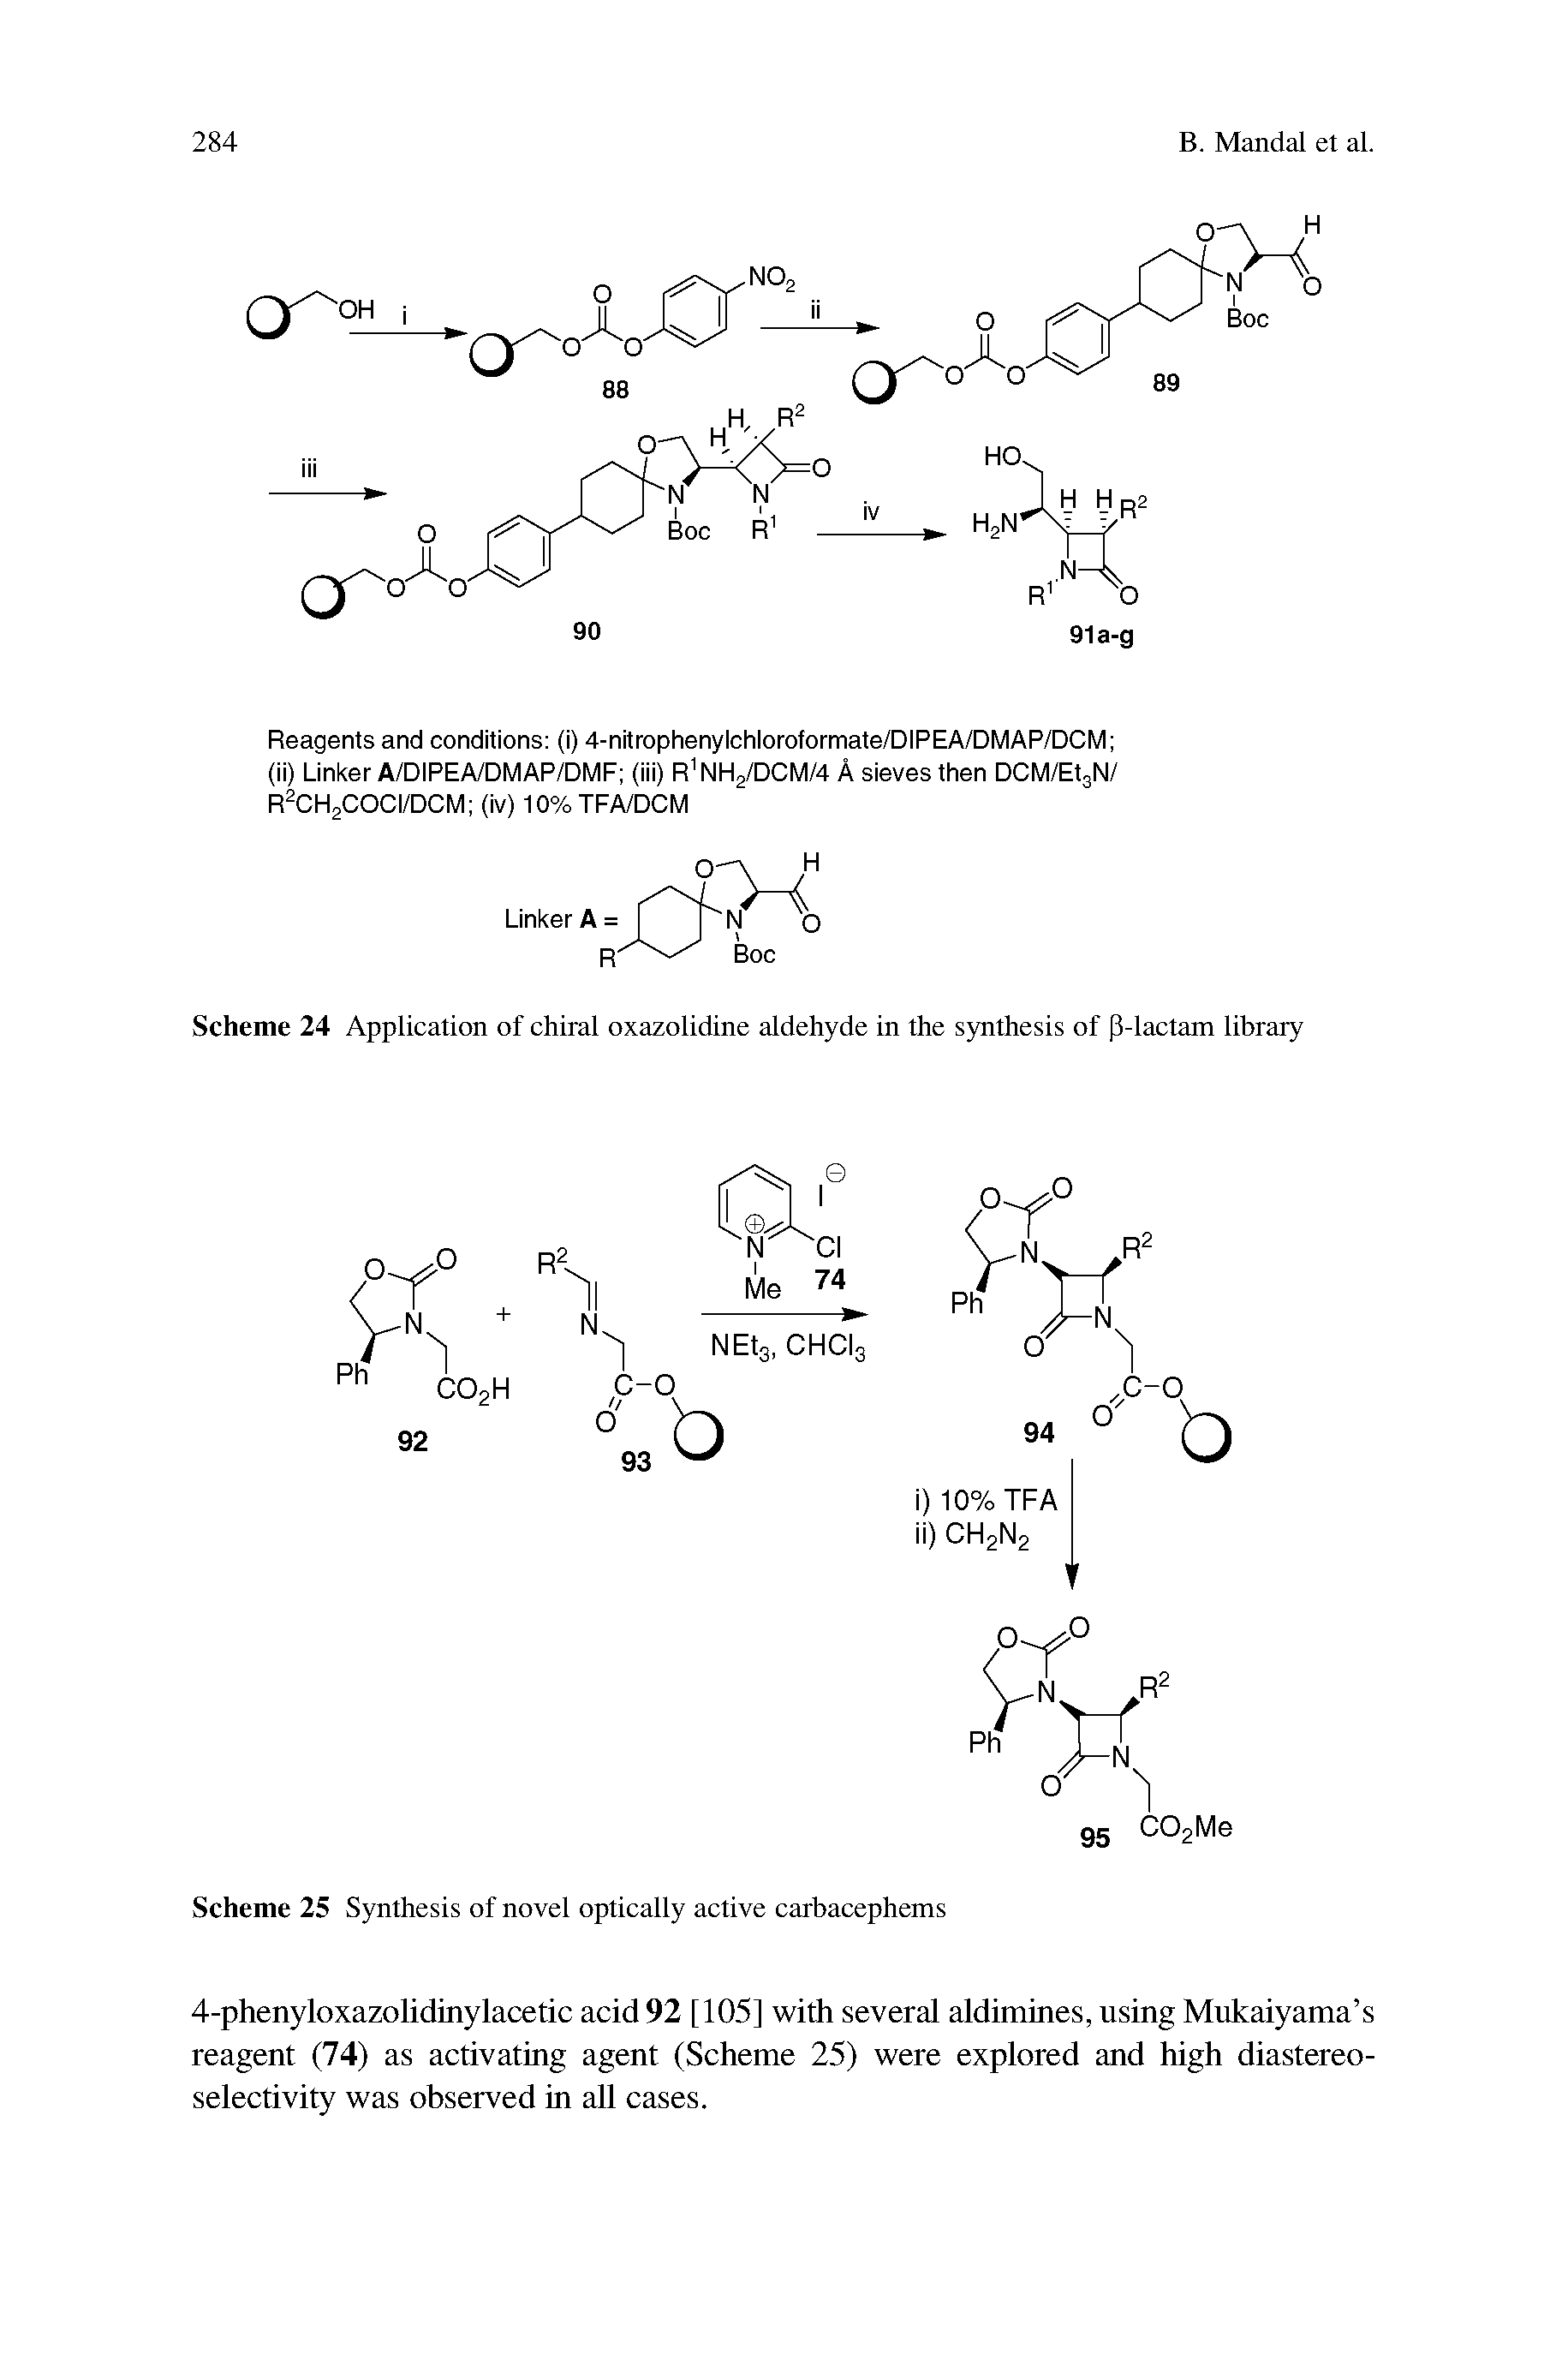 Scheme 24 Application of chiral oxazolidine aldehyde in the synthesis of P-lactam library...